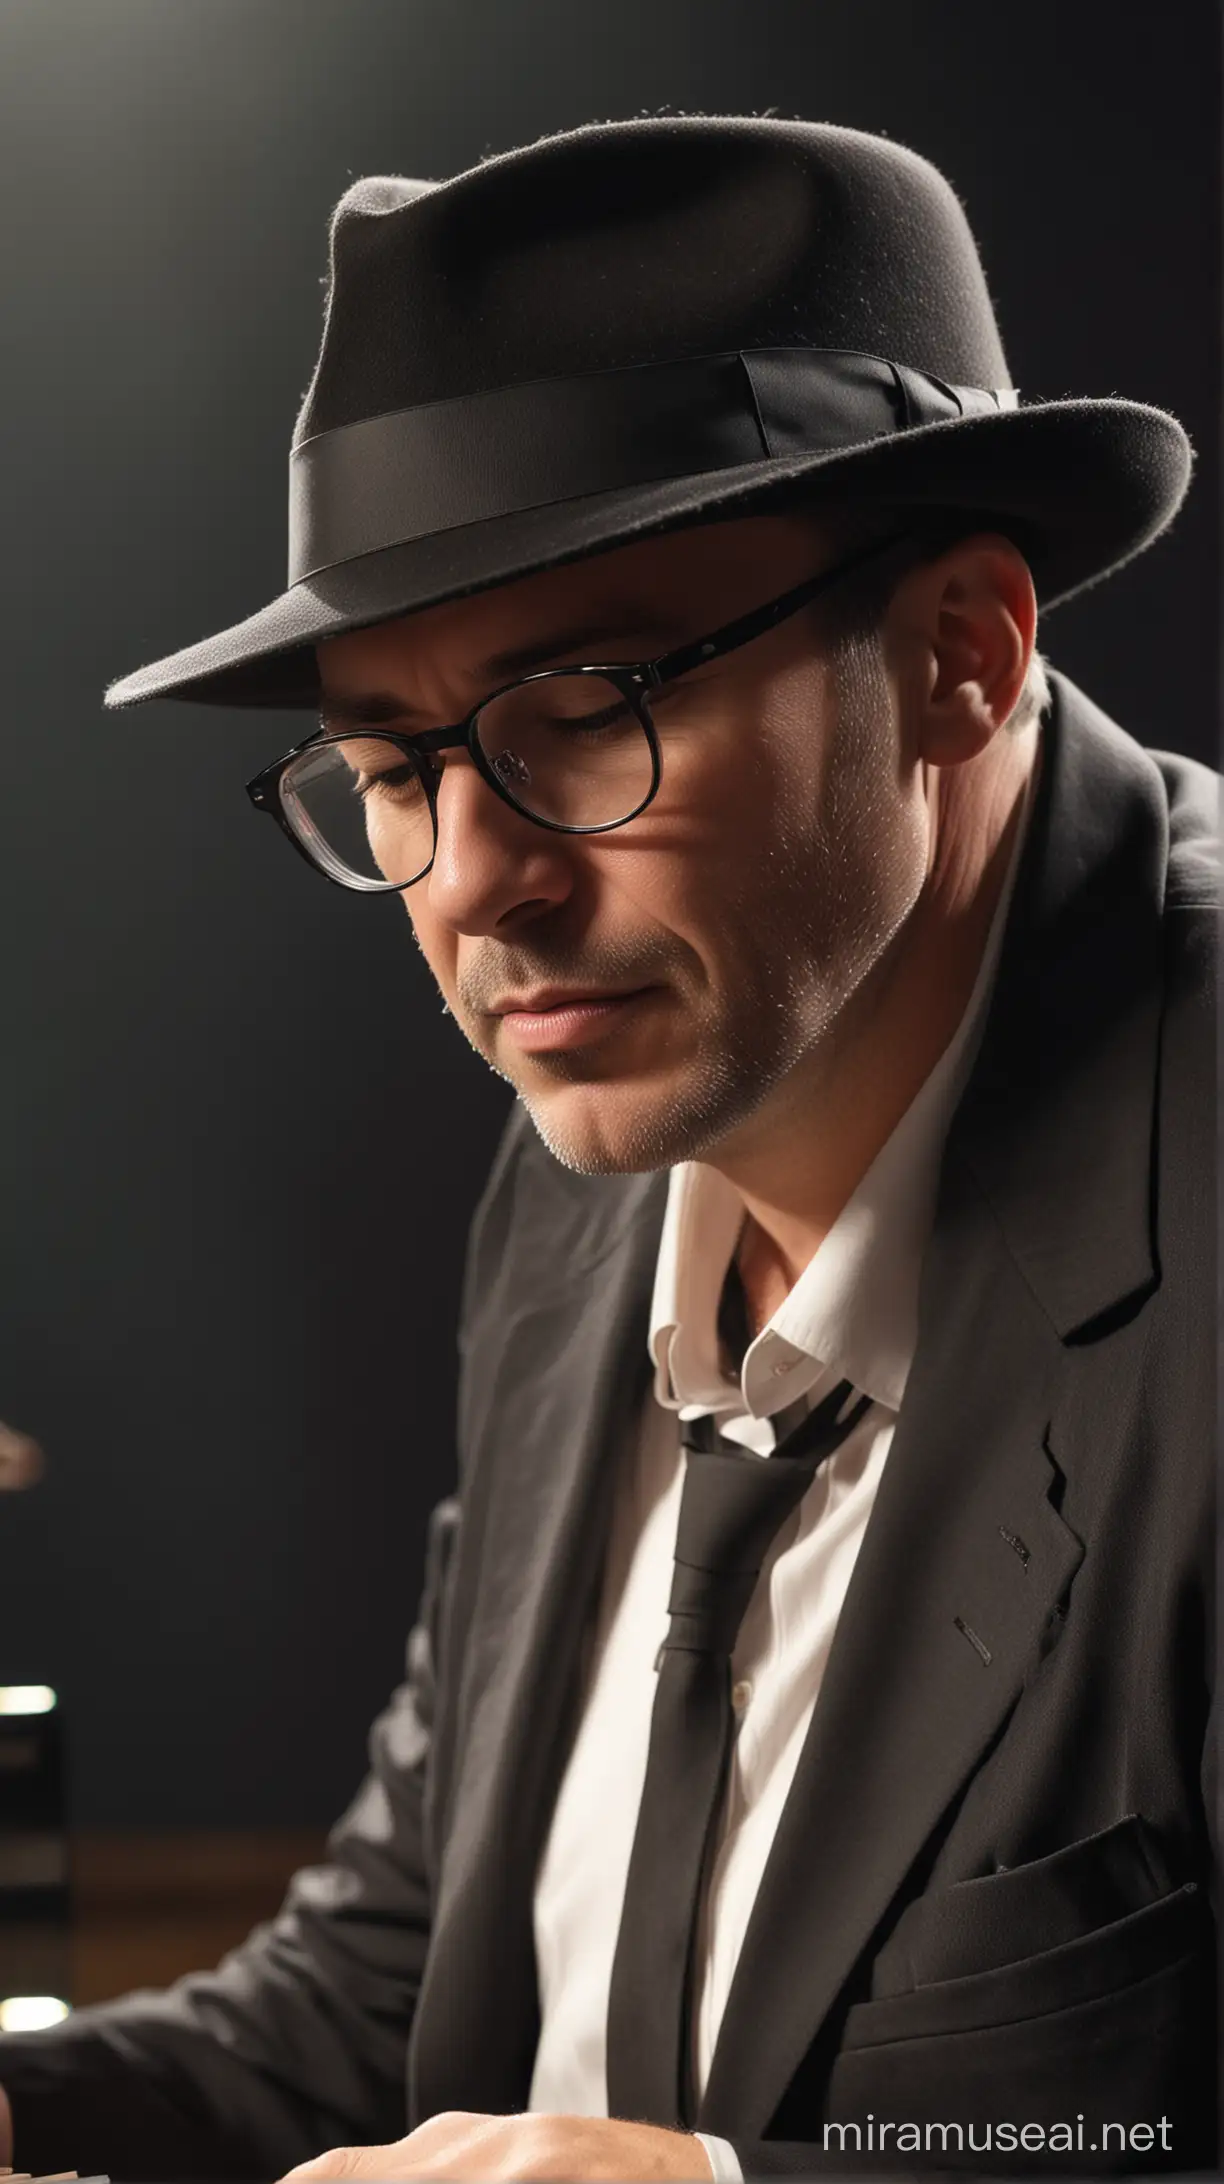 Men 46 years old, glasses, wearing fedira hat, singing sad song on the grand piano, on the stage, close up.